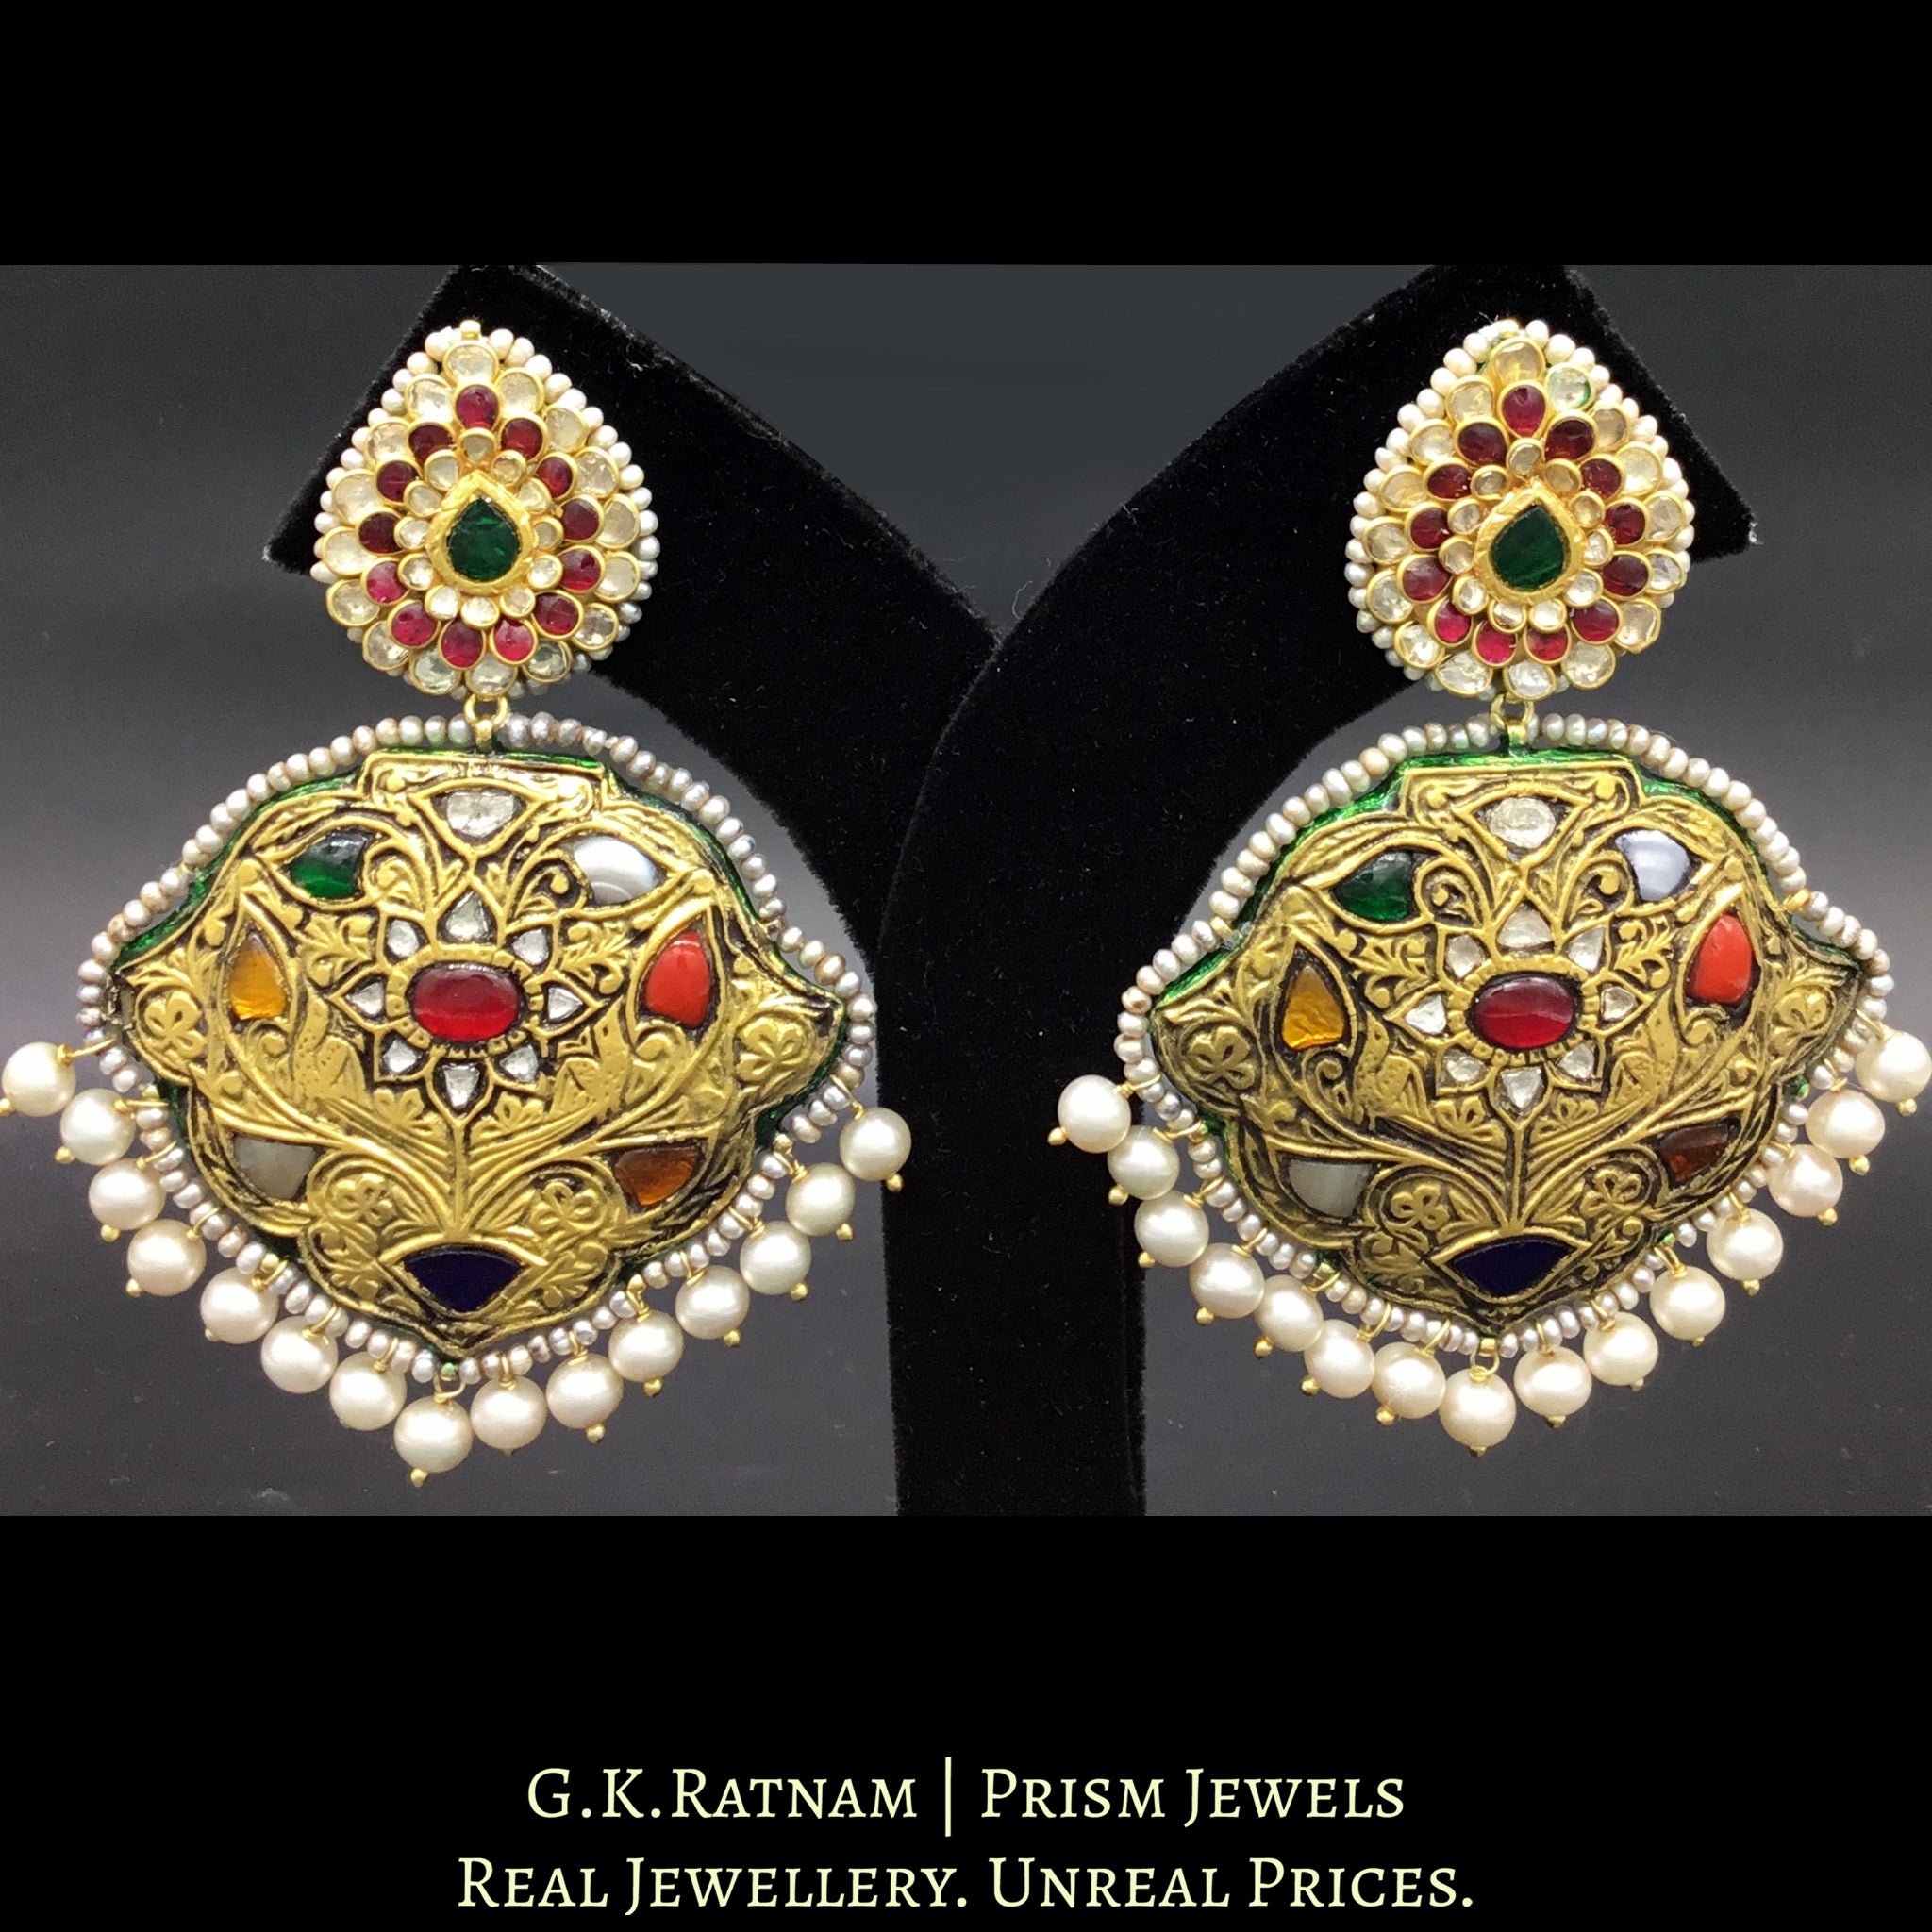 23k Gold and Diamond Polki antique Long Earring Pair with pear-shaped Pacchi Tops